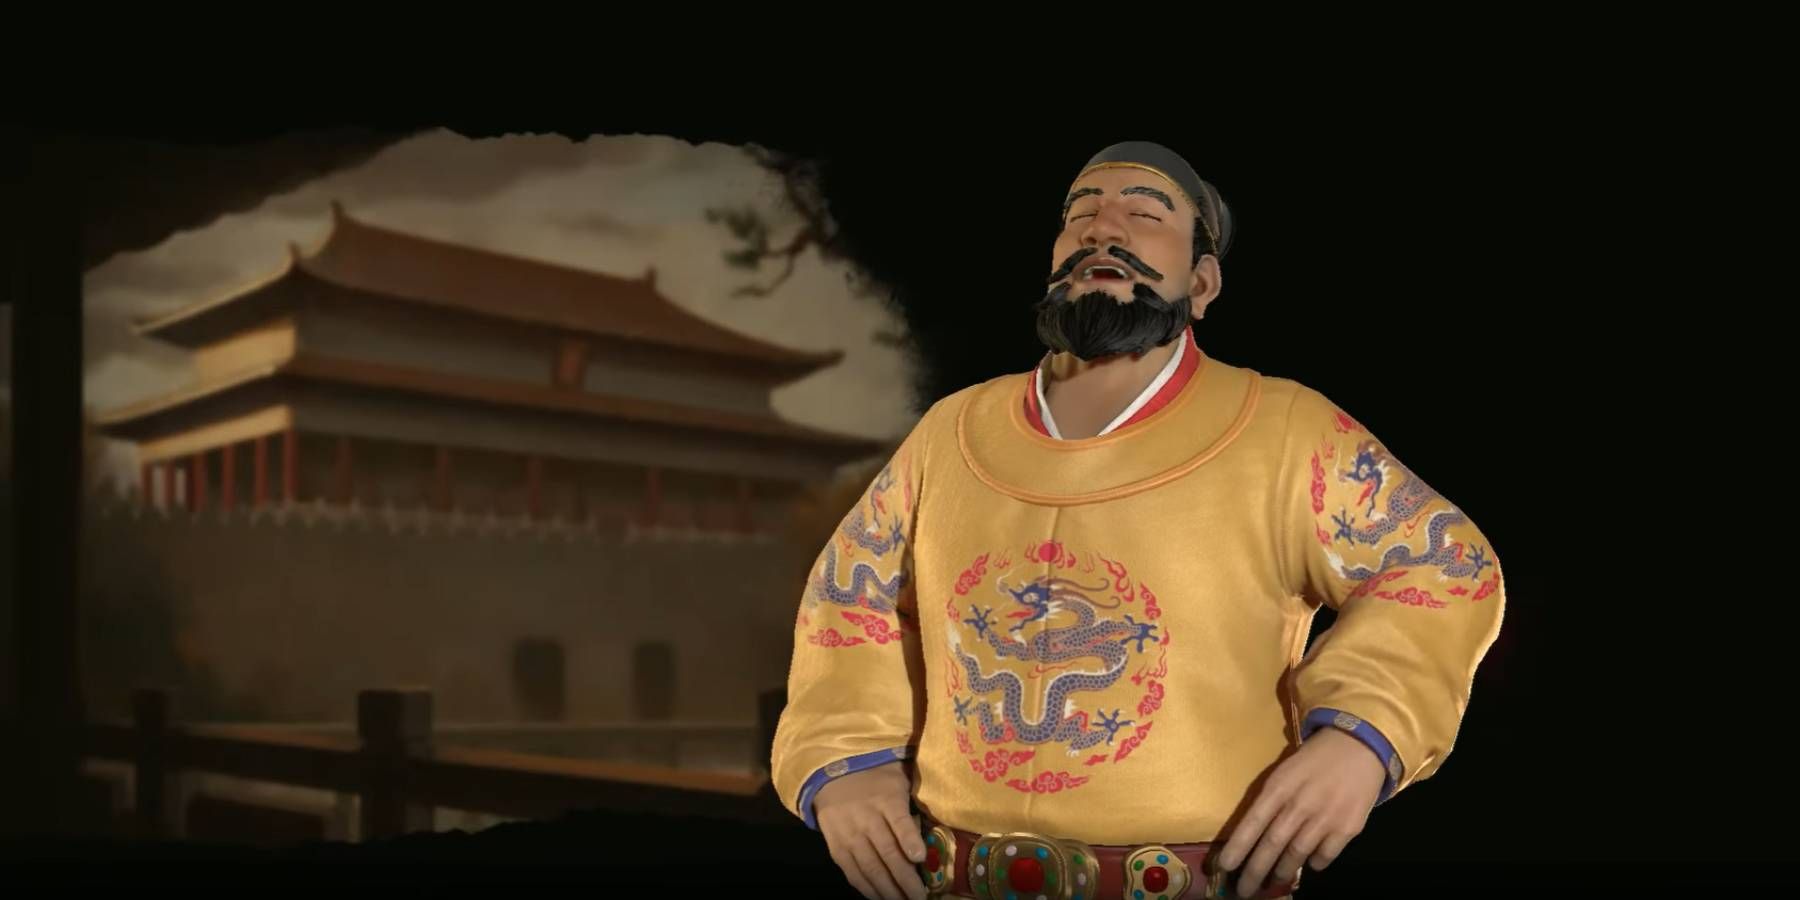 Yongle laughing in Civilization 6